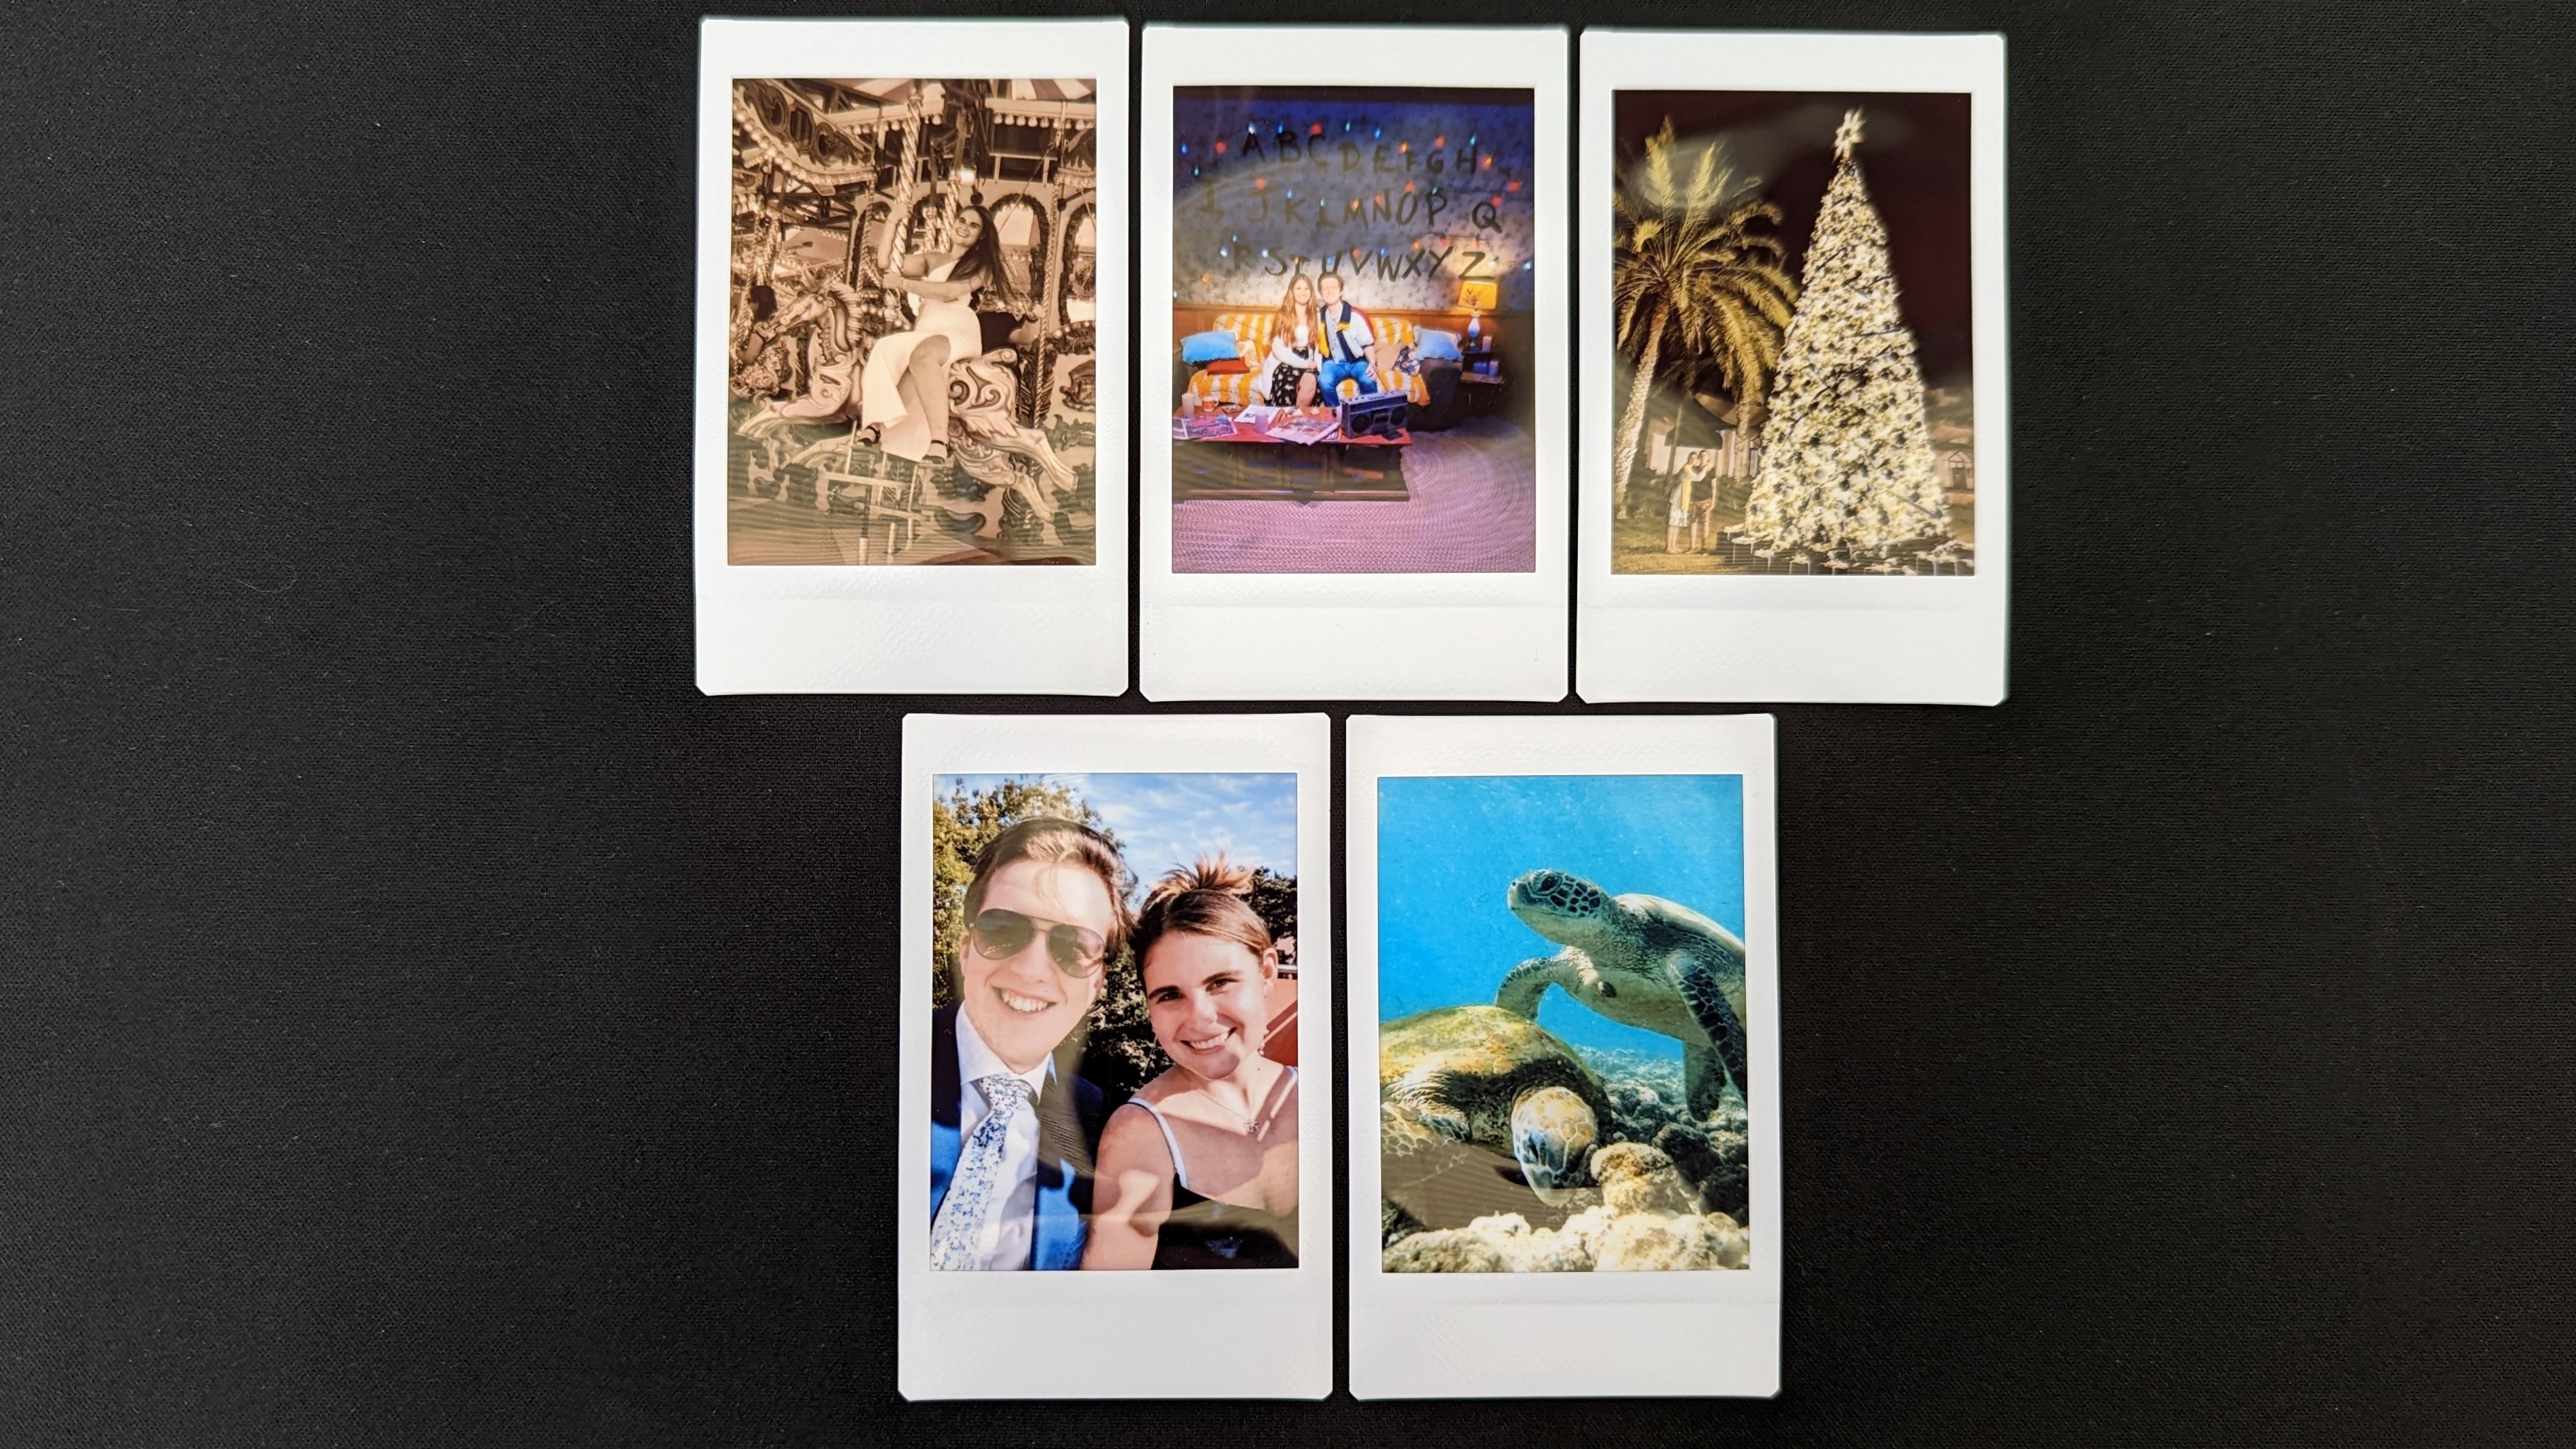 Pictures taken with the Instax Mini Link 2 include a photo of turtles in the sea and a woman riding a merry-go-round